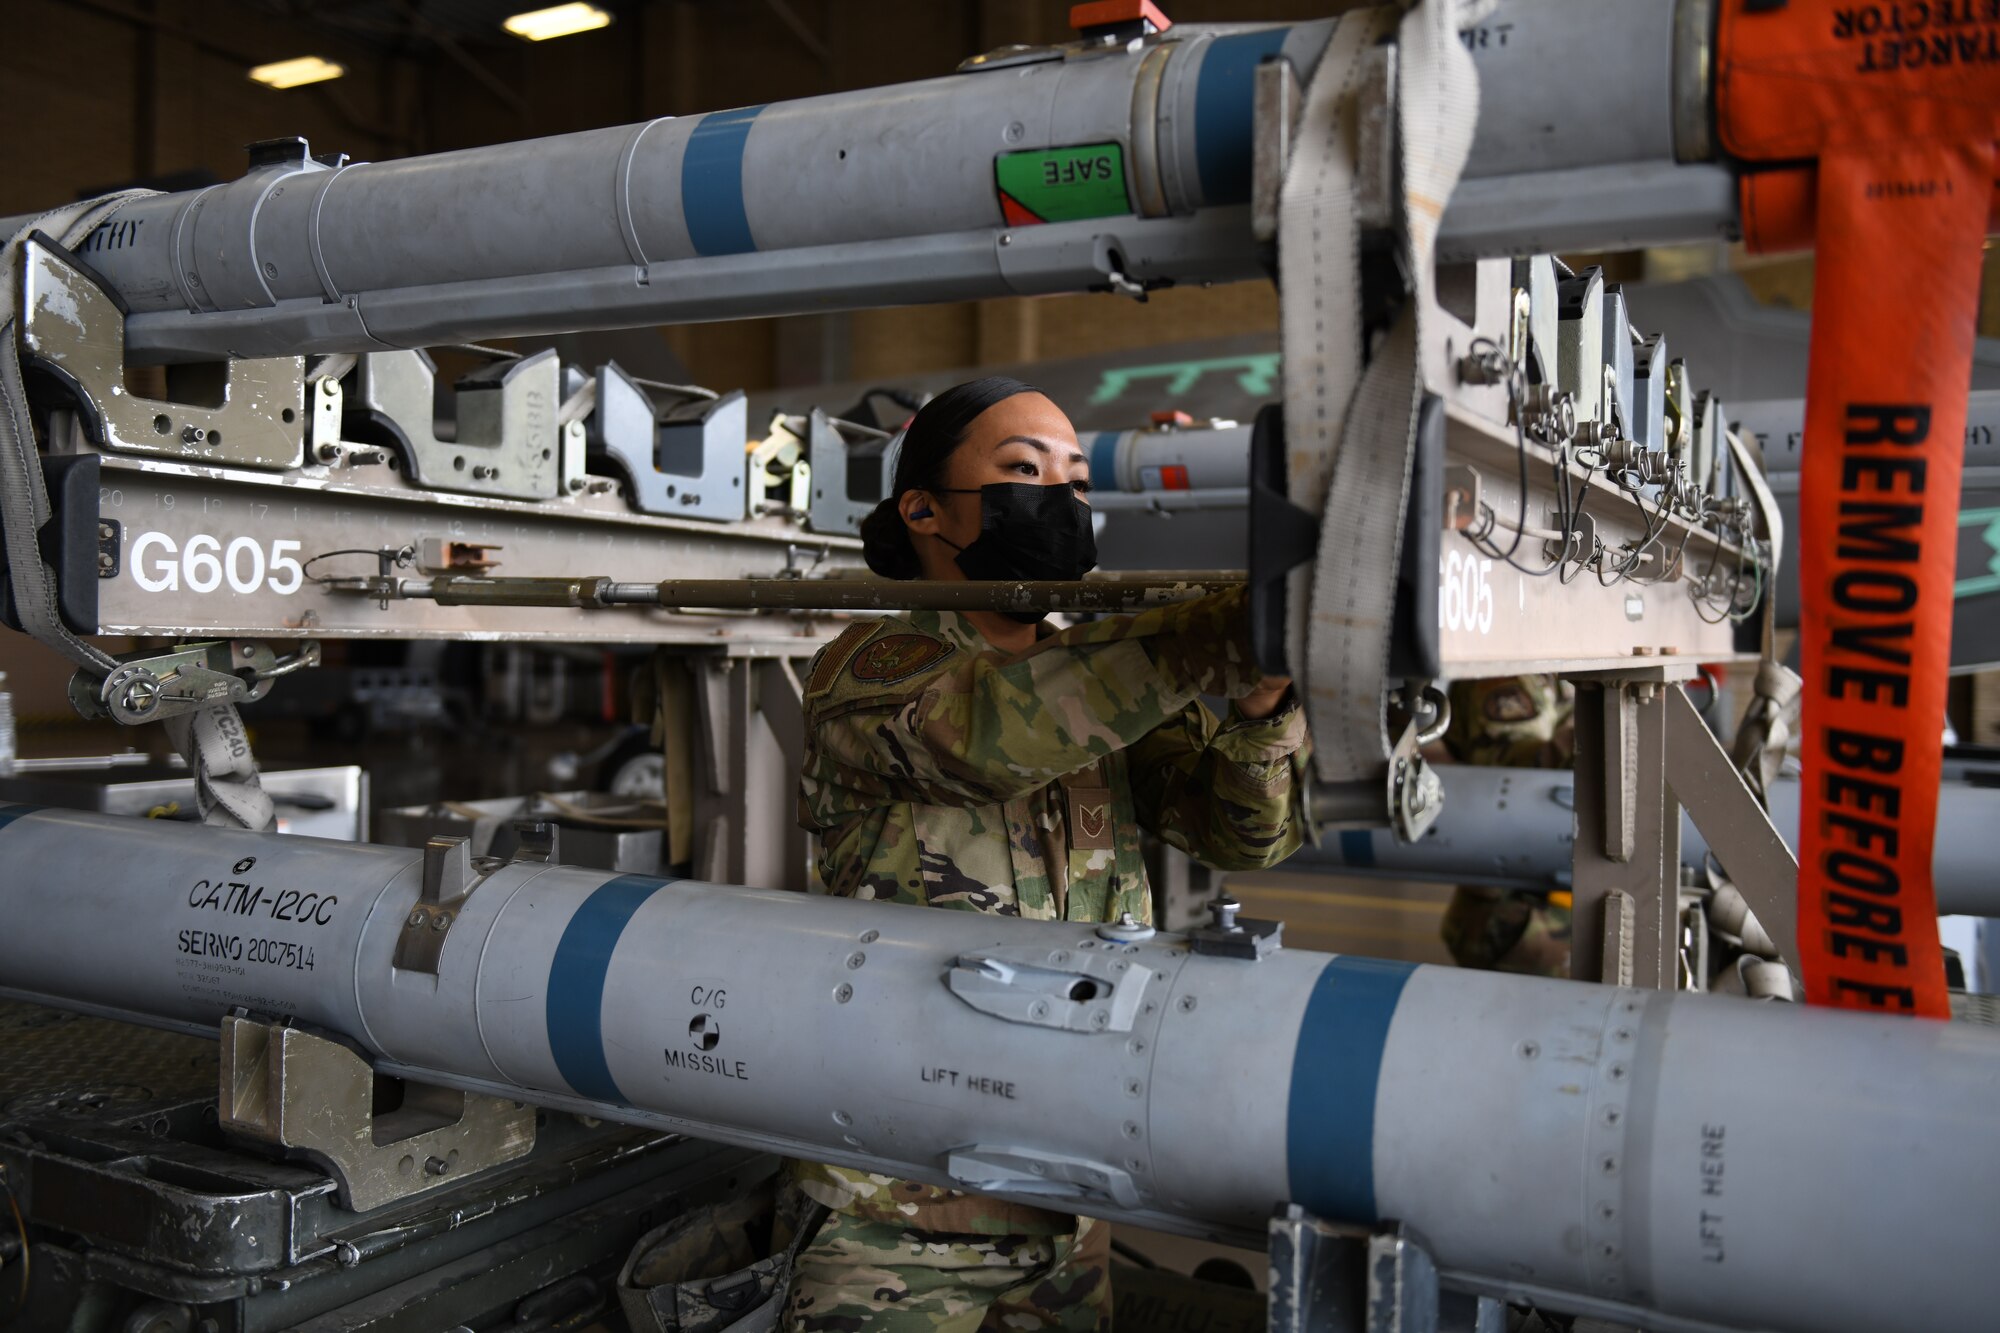 Tech. Sgt. Joyce Osornio-Magaña, 944th Fighter Wing weapons load technician, participates in an exhibition load March 25, 2021, at Luke Air Force Base, Arizona. The Women of Weapons Exhibition Load involved three teams made up of all women from different backgrounds, units, and ranks, honoring female maintainers for Women’s History Month. Diversity allows the Air Force to capitalize on all available talent by enabling a culture of inclusion. (U.S. Air Force photo by Staff Sgt. Amber Carter)